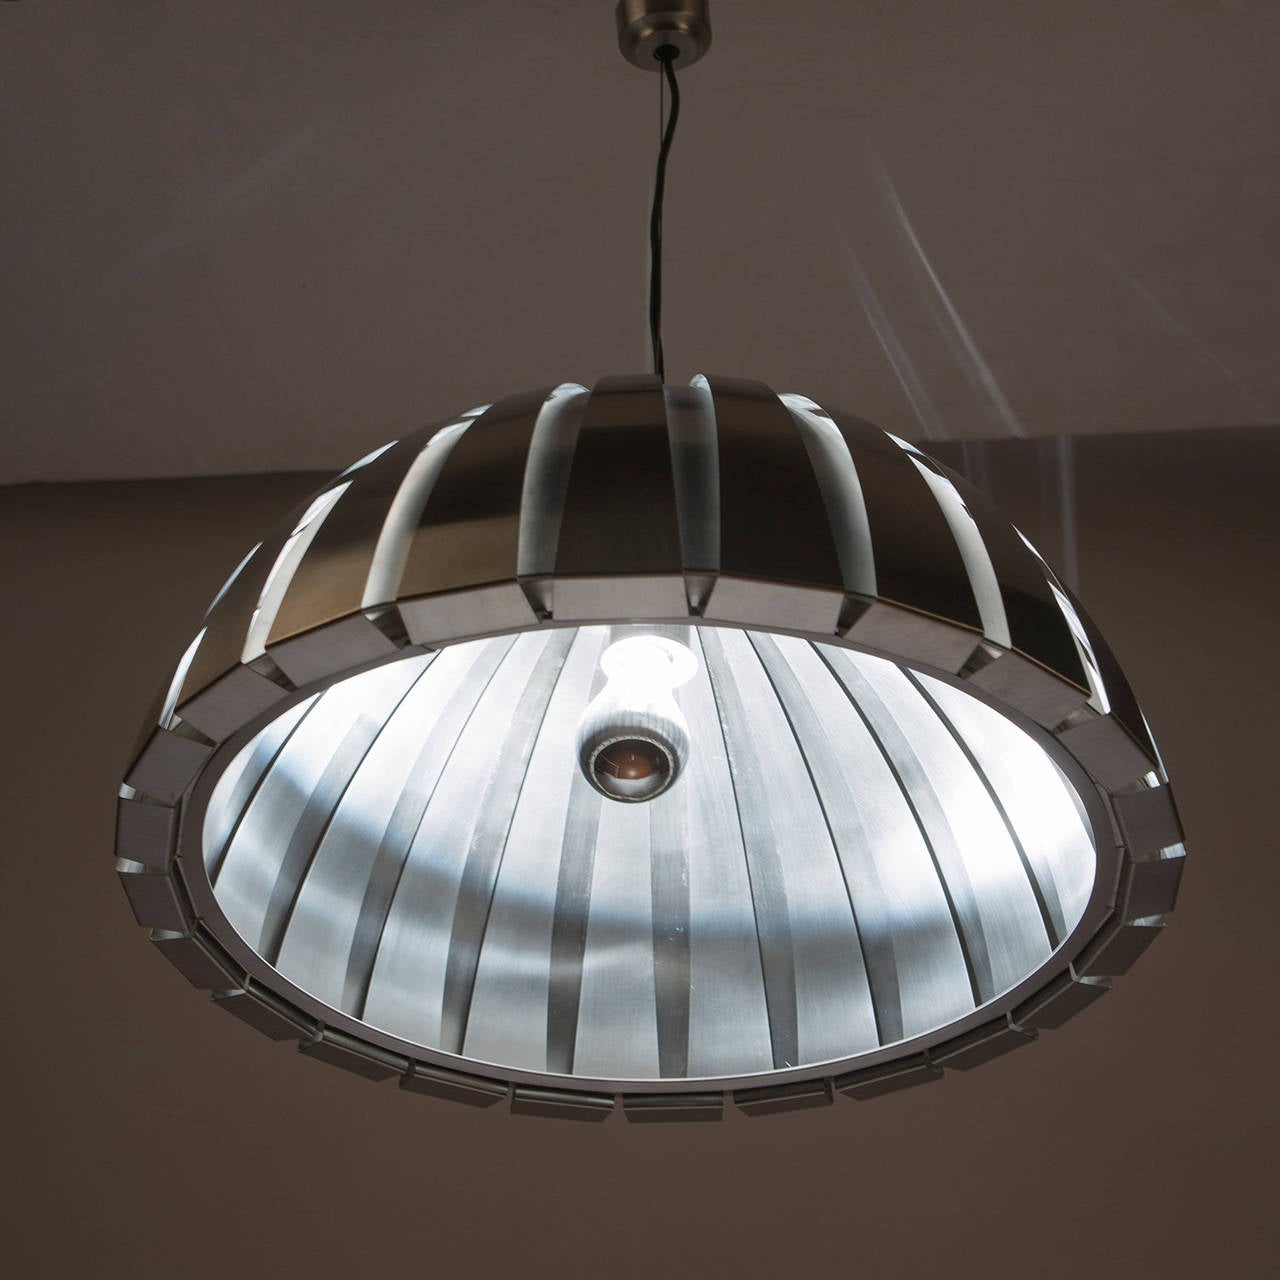 Italian Set of Two Steel Ceiling Lamps by Elio Martinelli for Martinelli, Italy, 1960s For Sale